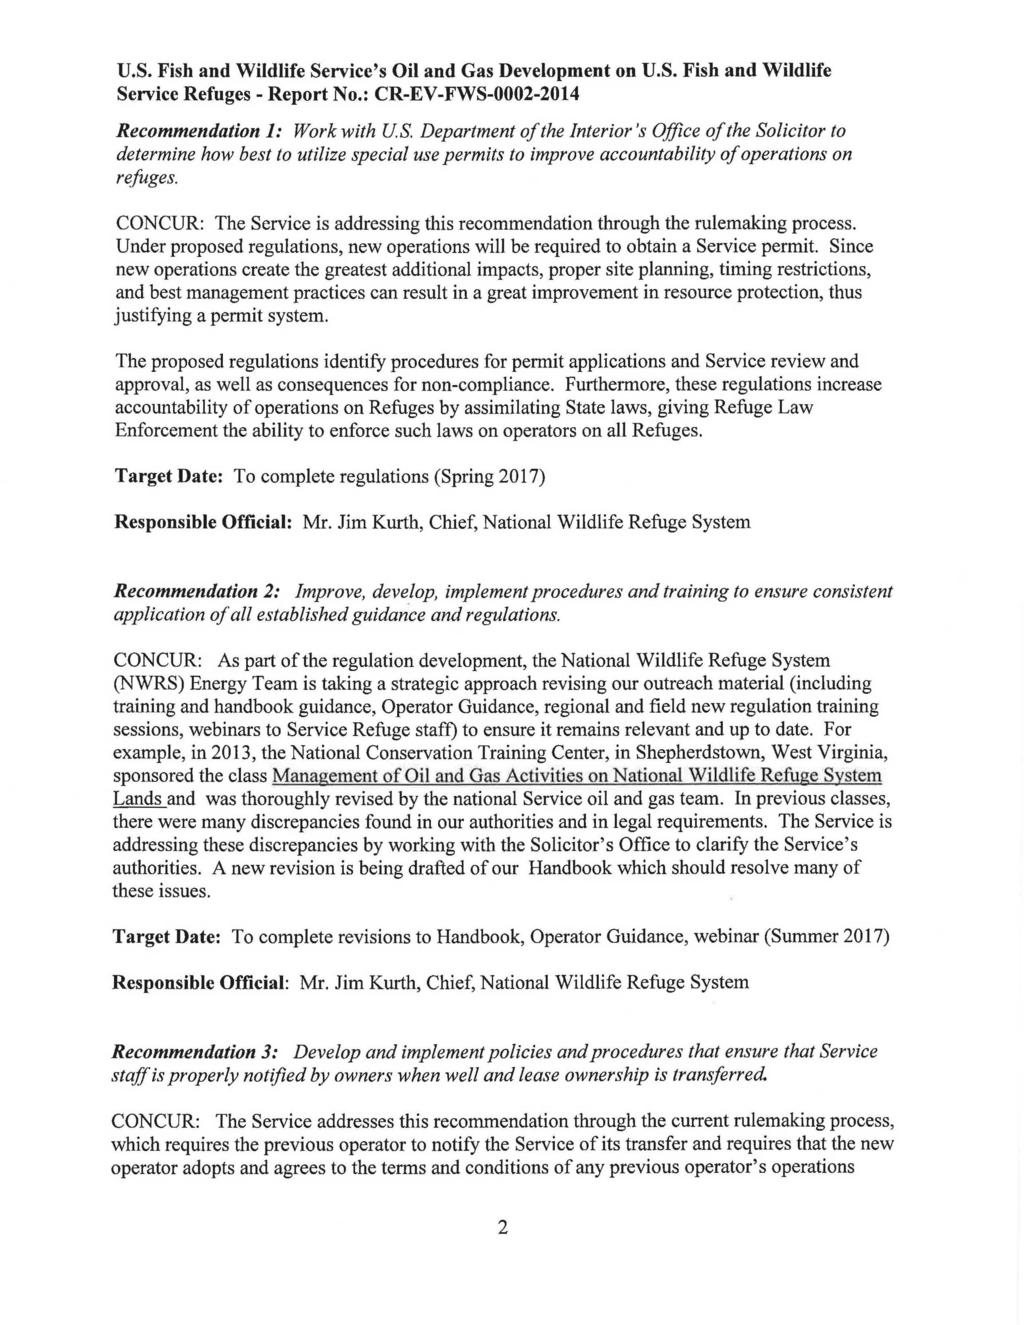 U.S. Fish and Wildlife Service,s Oil and Gas Development on U.S. Fish and Wildlife Service Refuges- Report No.: CR-EV-FWS-0002-2014 Recommendation 1: Work with US.